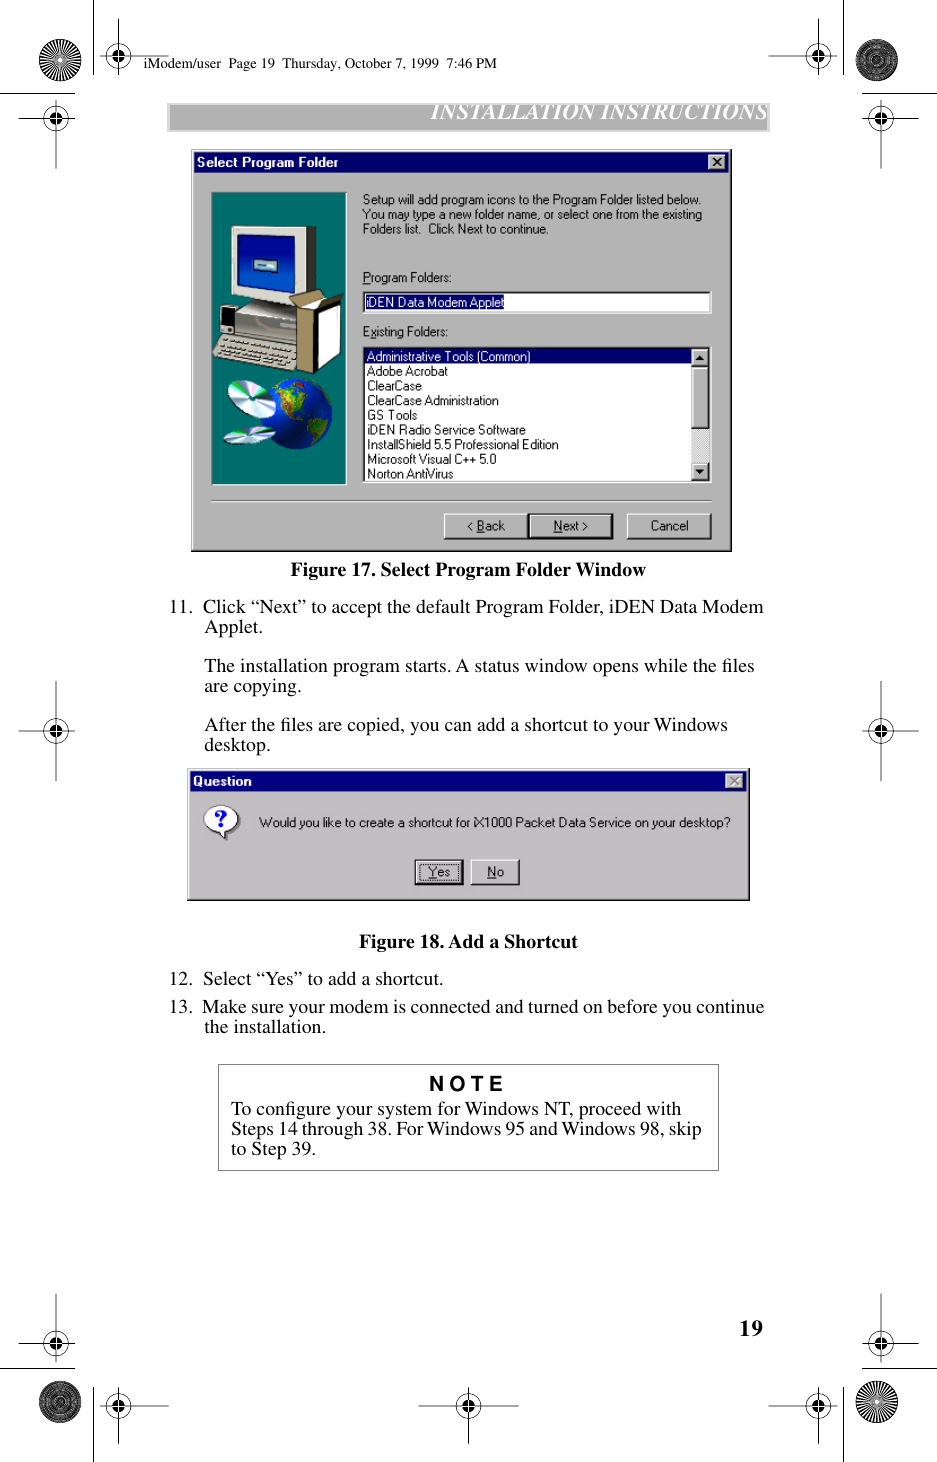 19   INSTALLATION INSTRUCTIONSFigure 17. Select Program Folder Window11.  Click “Next” to accept the default Program Folder, iDEN Data Modem Applet. The installation program starts. A status window opens while the ﬁles are copying. After the ﬁles are copied, you can add a shortcut to your Windows desktop.Figure 18. Add a Shortcut12.  Select “Yes” to add a shortcut.13.  Make sure your modem is connected and turned on before you continue the installation.NOTETo conﬁgure your system for Windows NT, proceed with Steps 14 through 38. For Windows 95 and Windows 98, skip to Step 39.iModem/user  Page 19  Thursday, October 7, 1999  7:46 PM